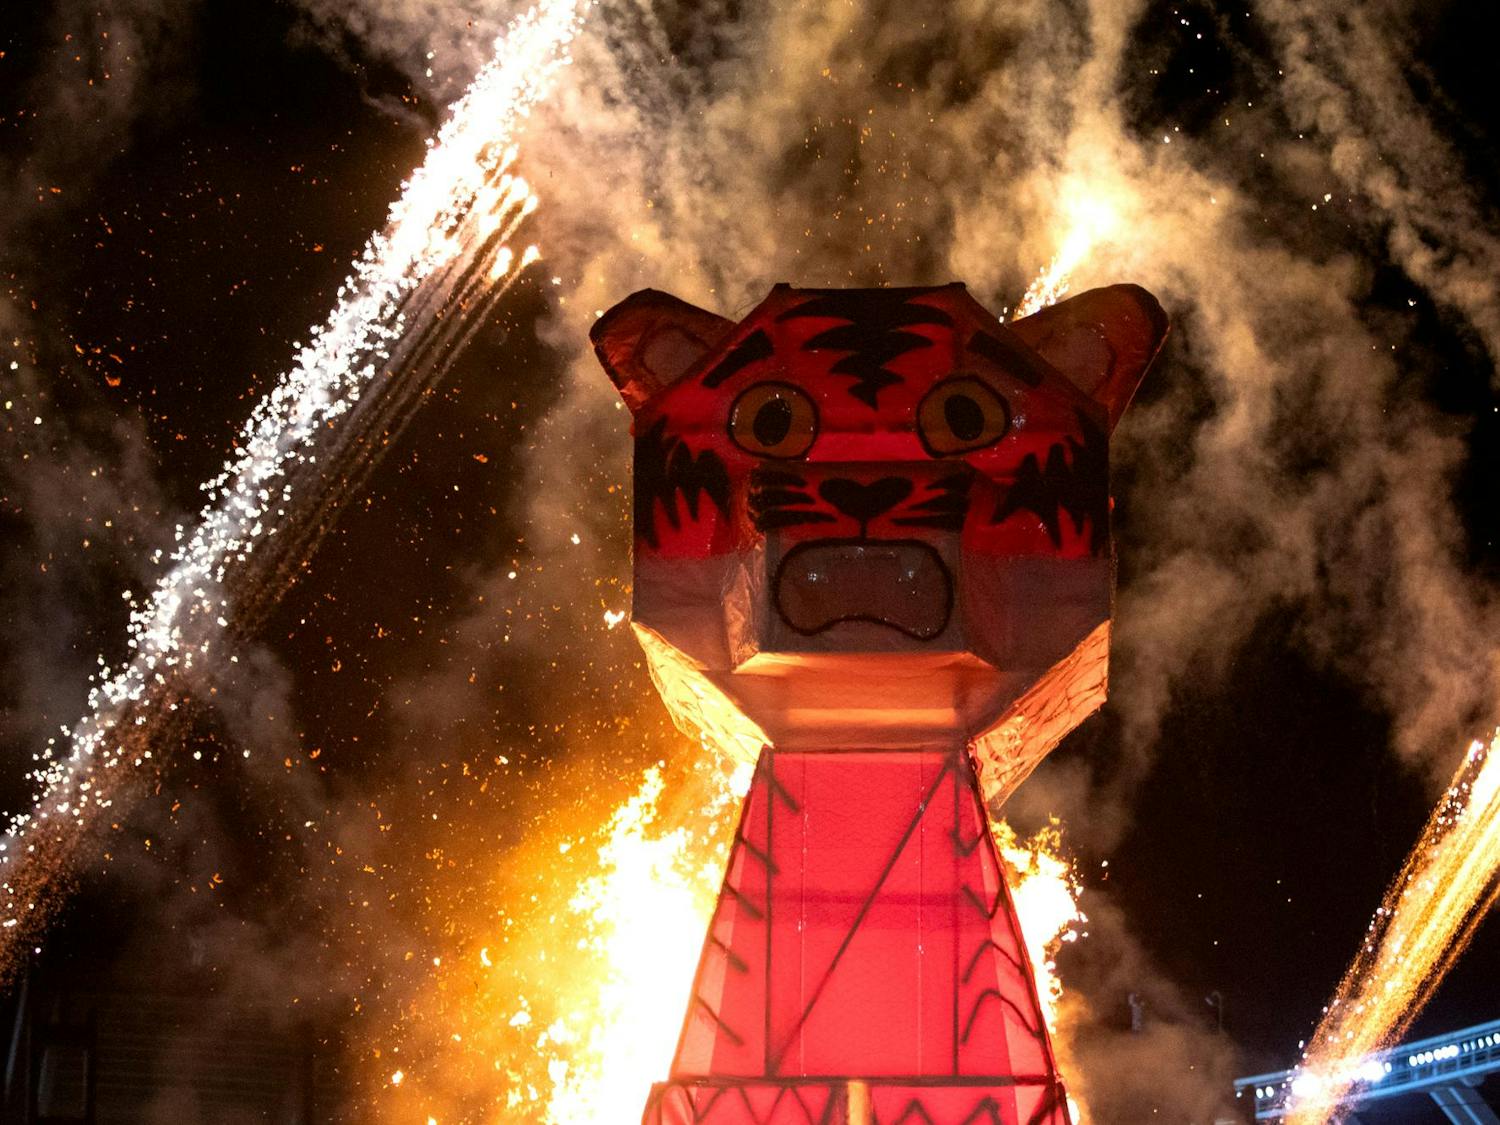 Fireworks go off as the wooden tiger — constructed by the USC chapter of the American Society of Mechanical Engineers and the Society of Hispanic Professional Engineers — is set aflame. The tiger has been built to be more than 30 feet tall for several years.